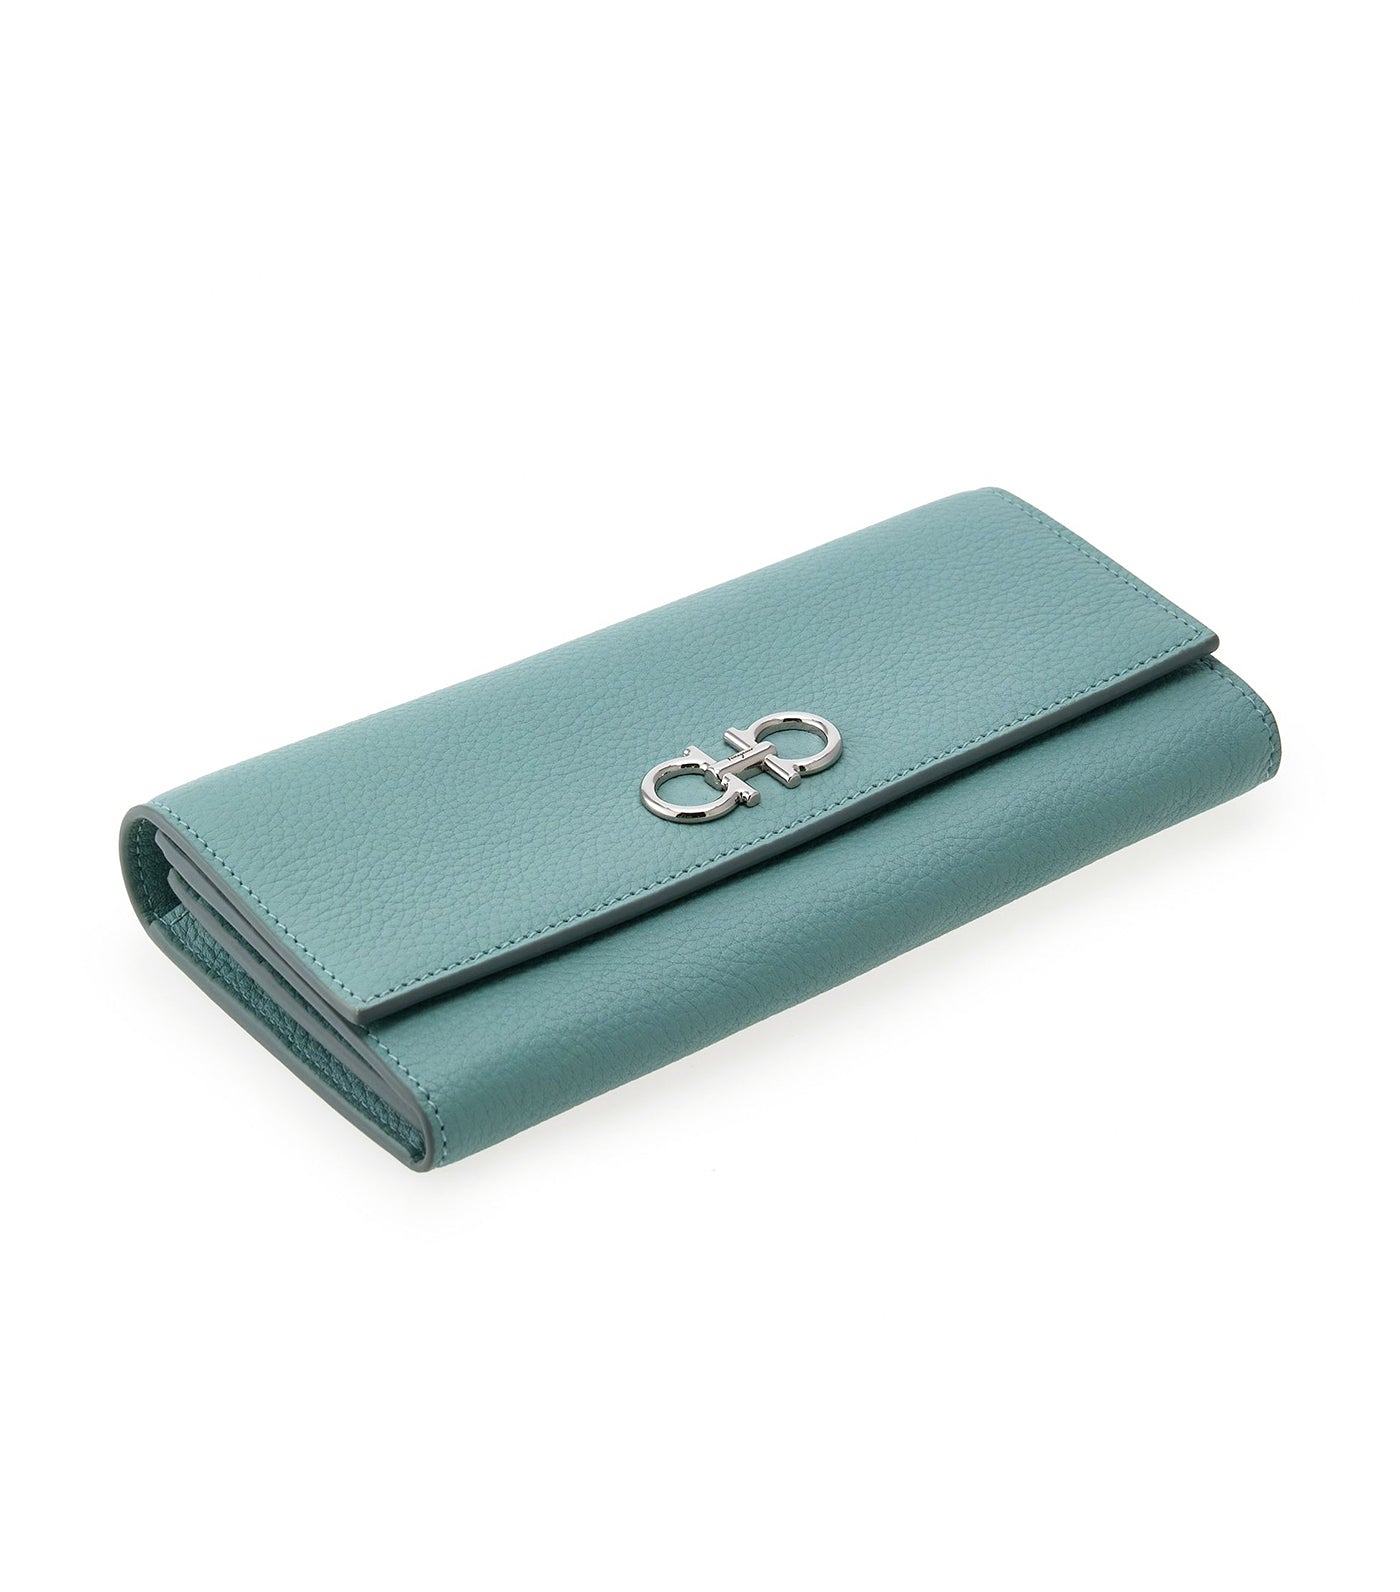 Gancini Wallet with Chain Lucky Charme